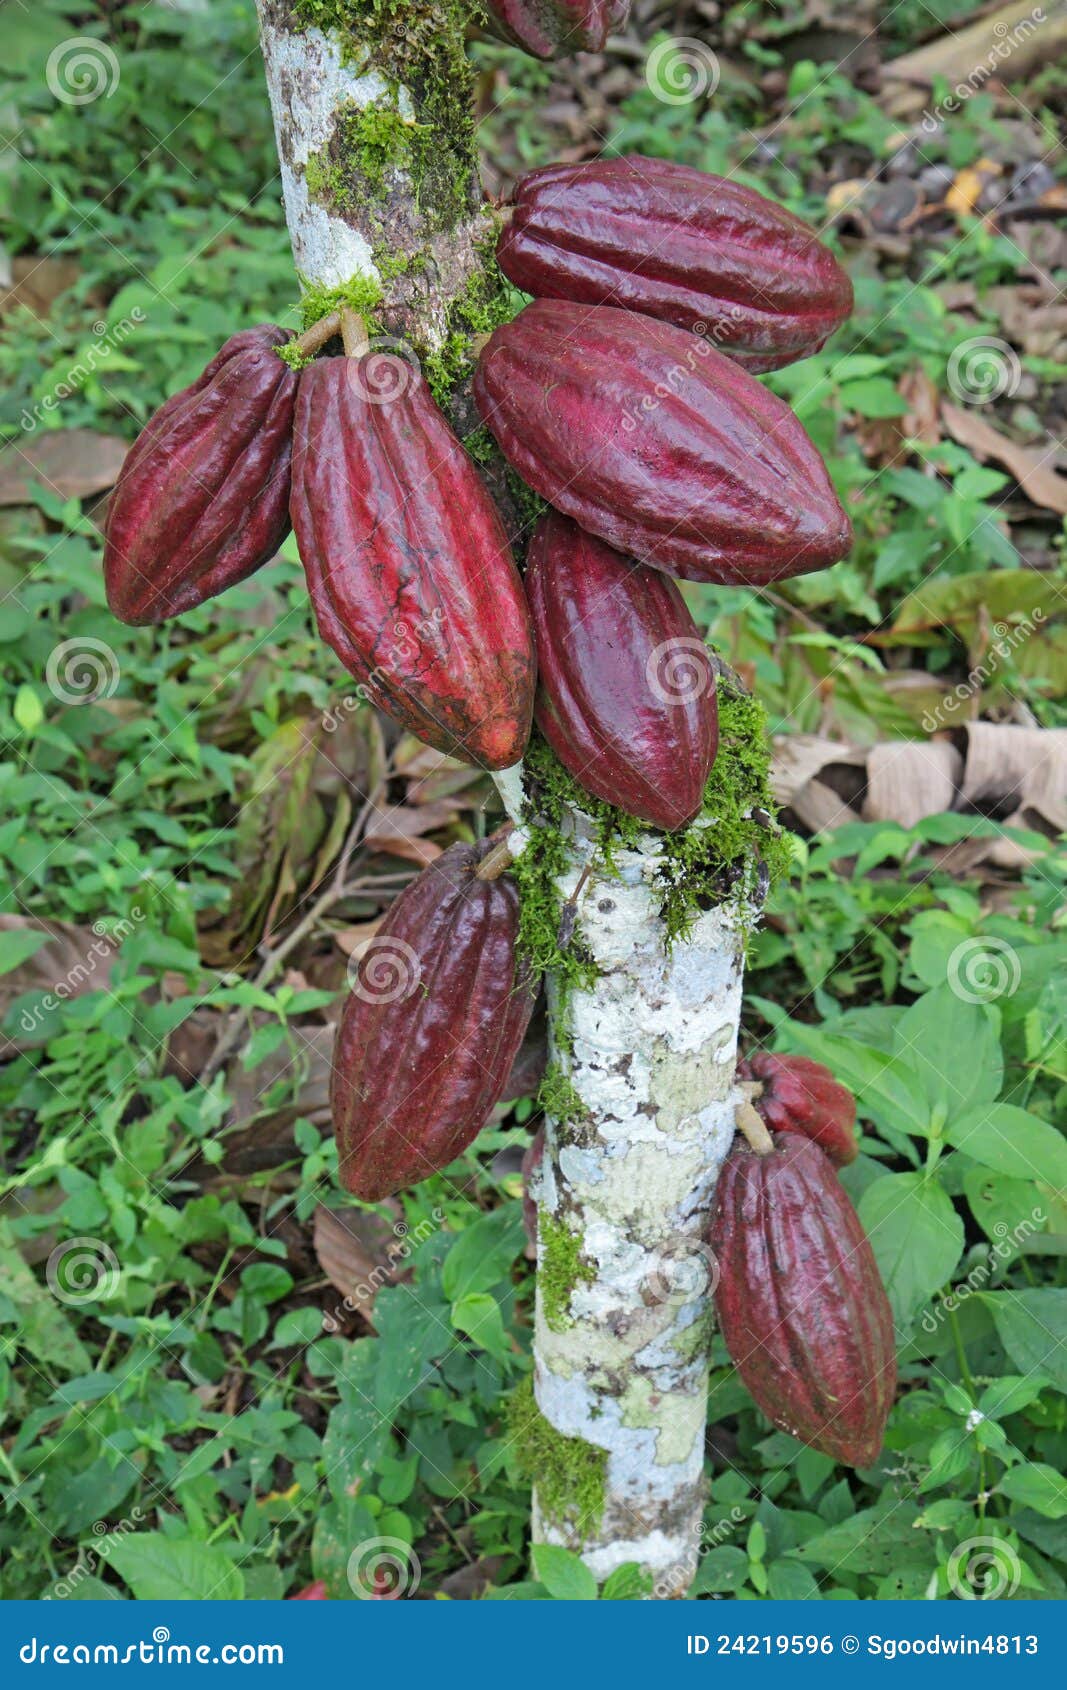 multiple pods of arriba cacao